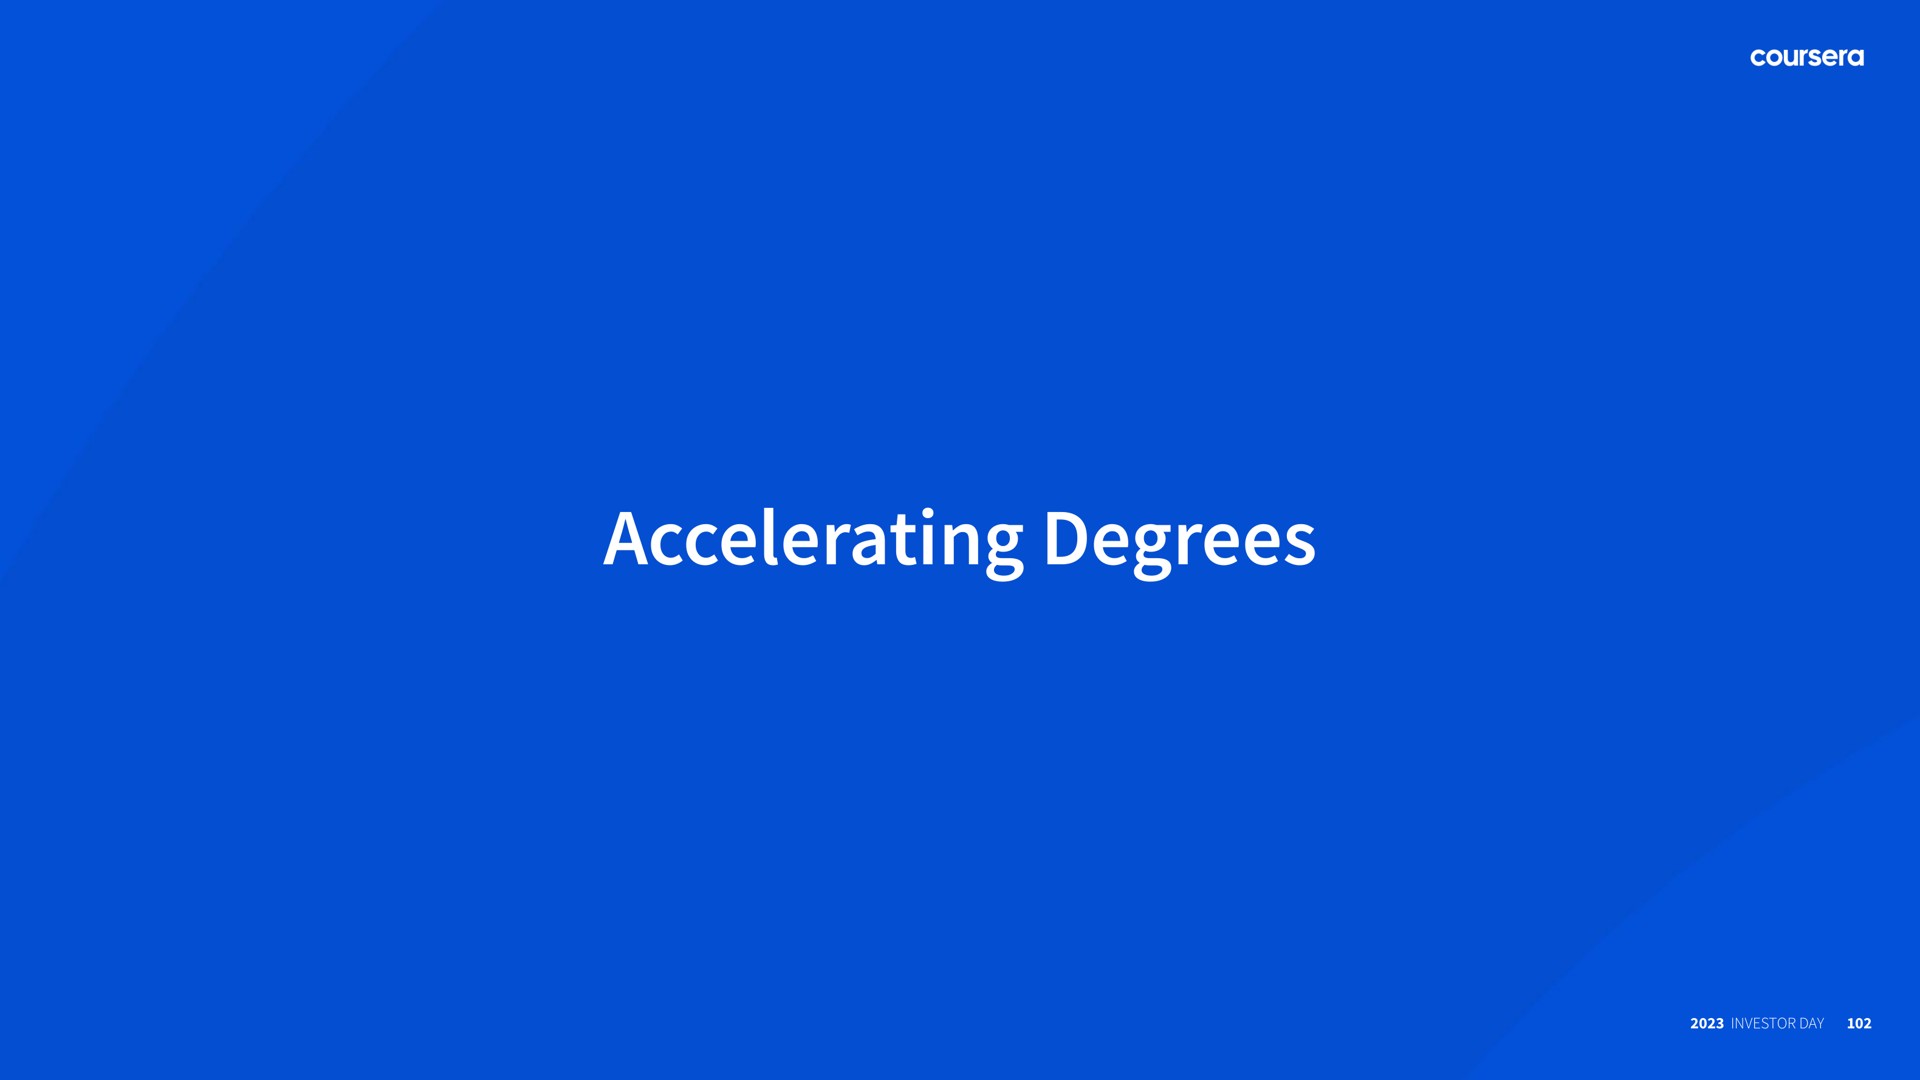 accelerating degrees | Coursera